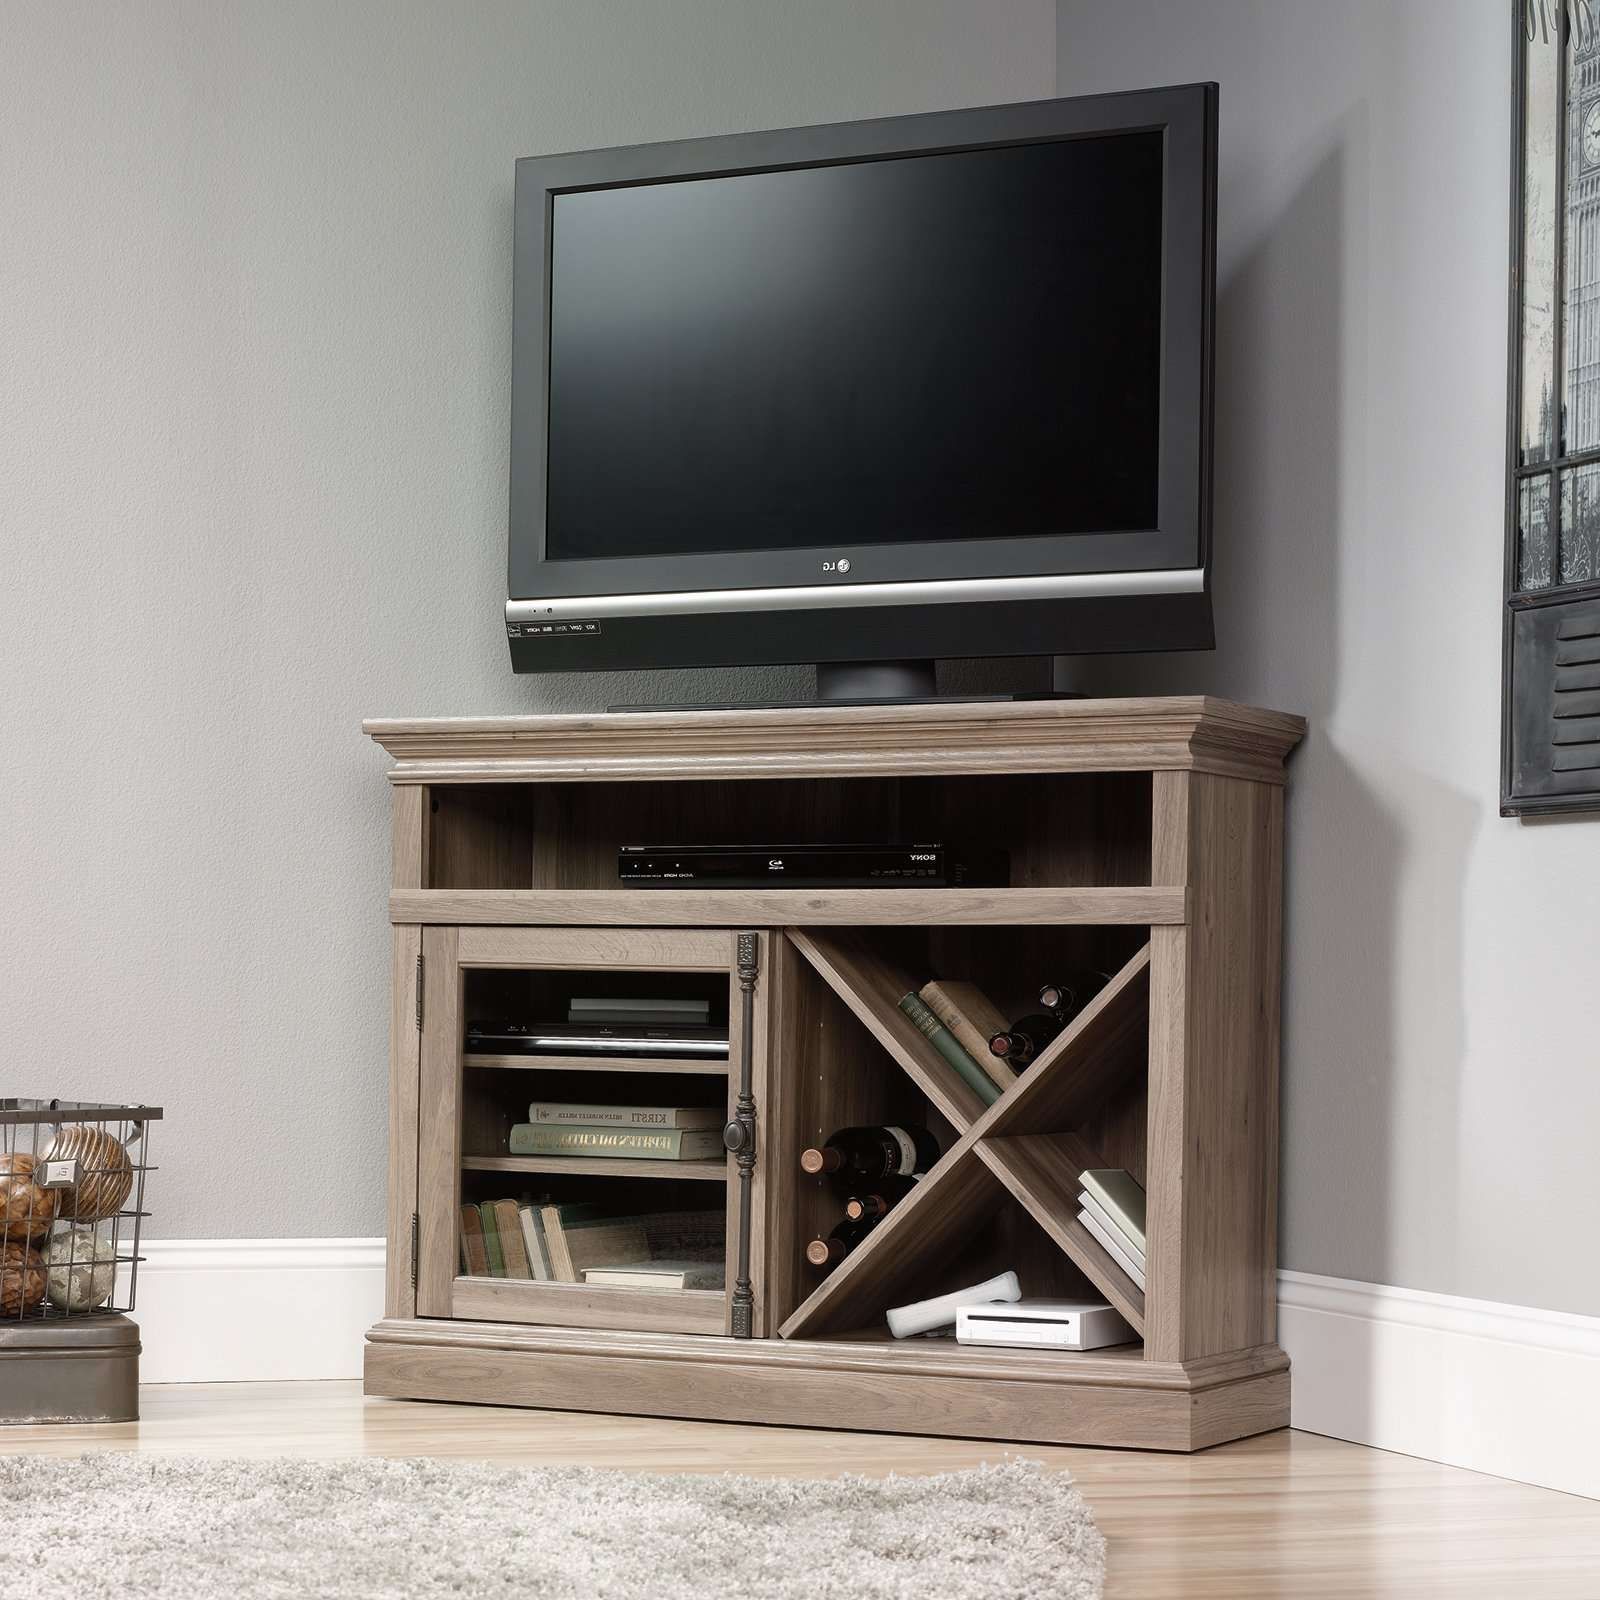 Wall Units. Marvellous Walmart Entertainment Stand: Awesome Regarding Single Shelf Tv Stands (Gallery 13 of 15)